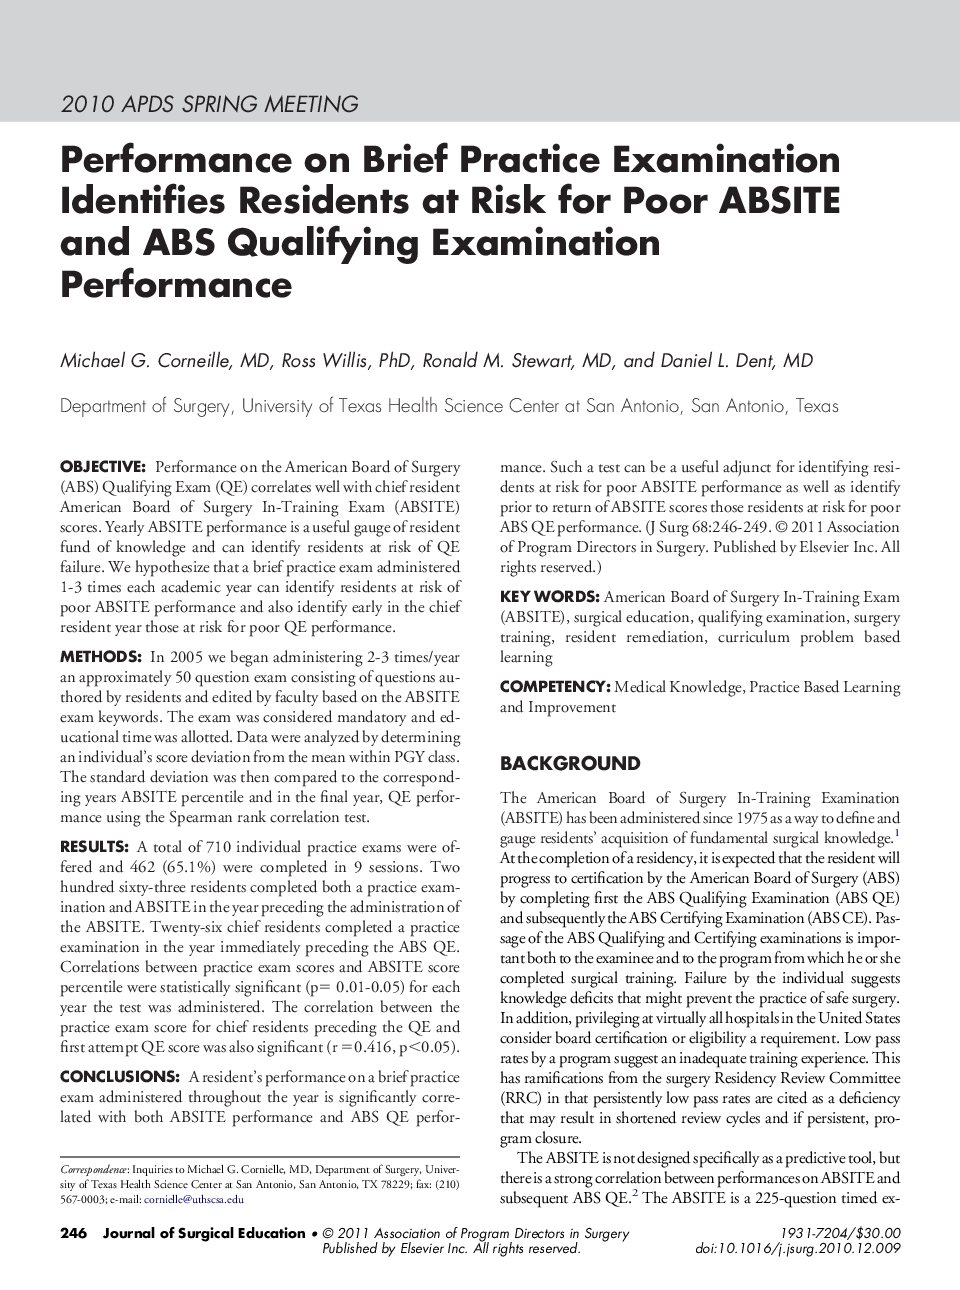 Performance on Brief Practice Examination Identifies Residents at Risk for Poor ABSITE and ABS Qualifying Examination Performance